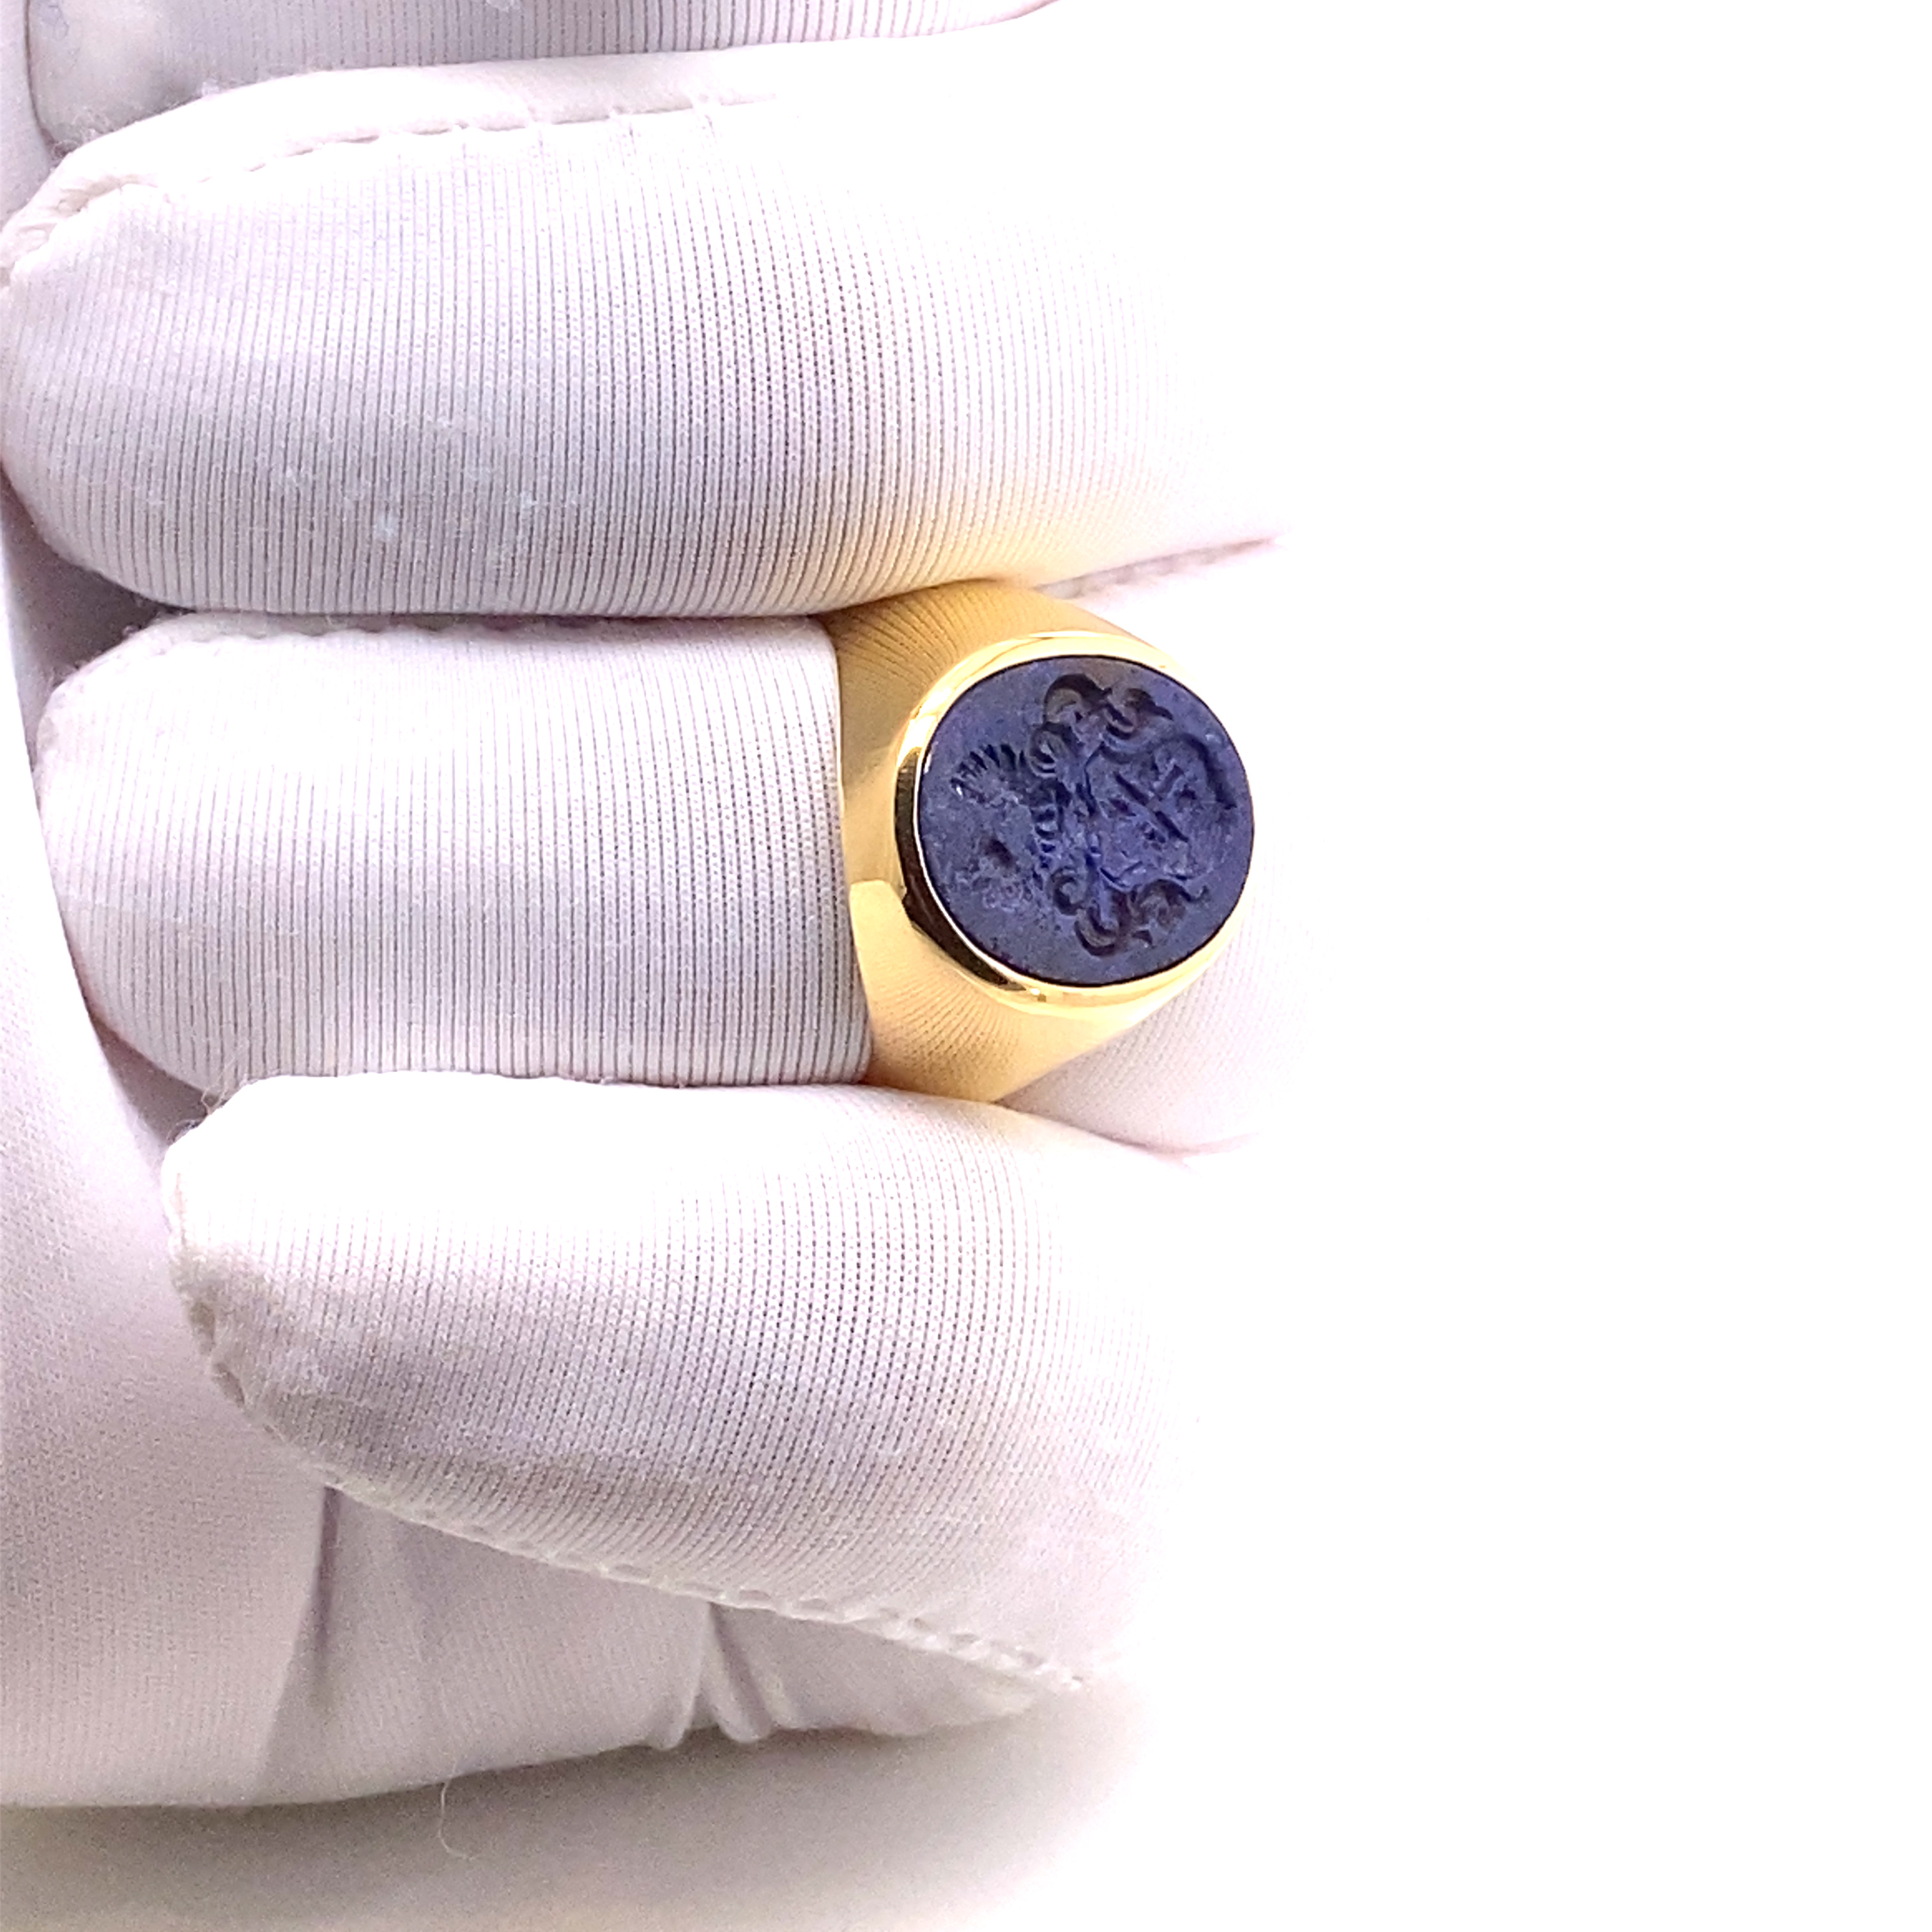 18K signet ring with carved lapis lazuli